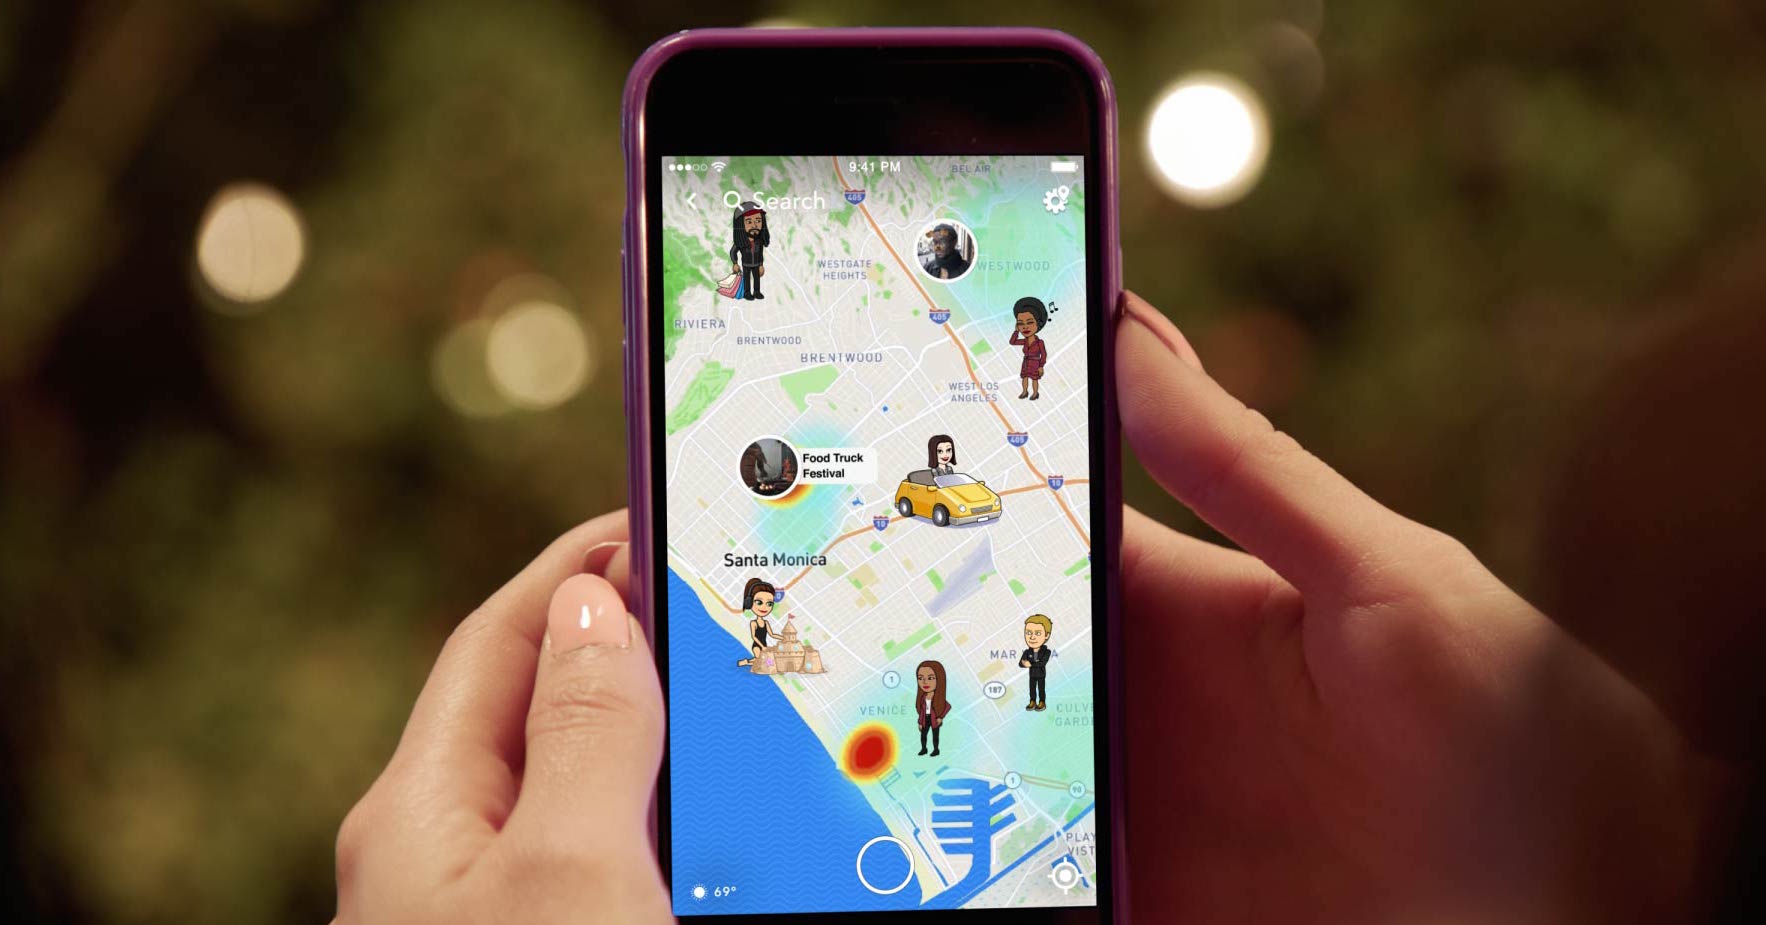 Instagram receives replay for live streams; Snapchat launches map feature with user location